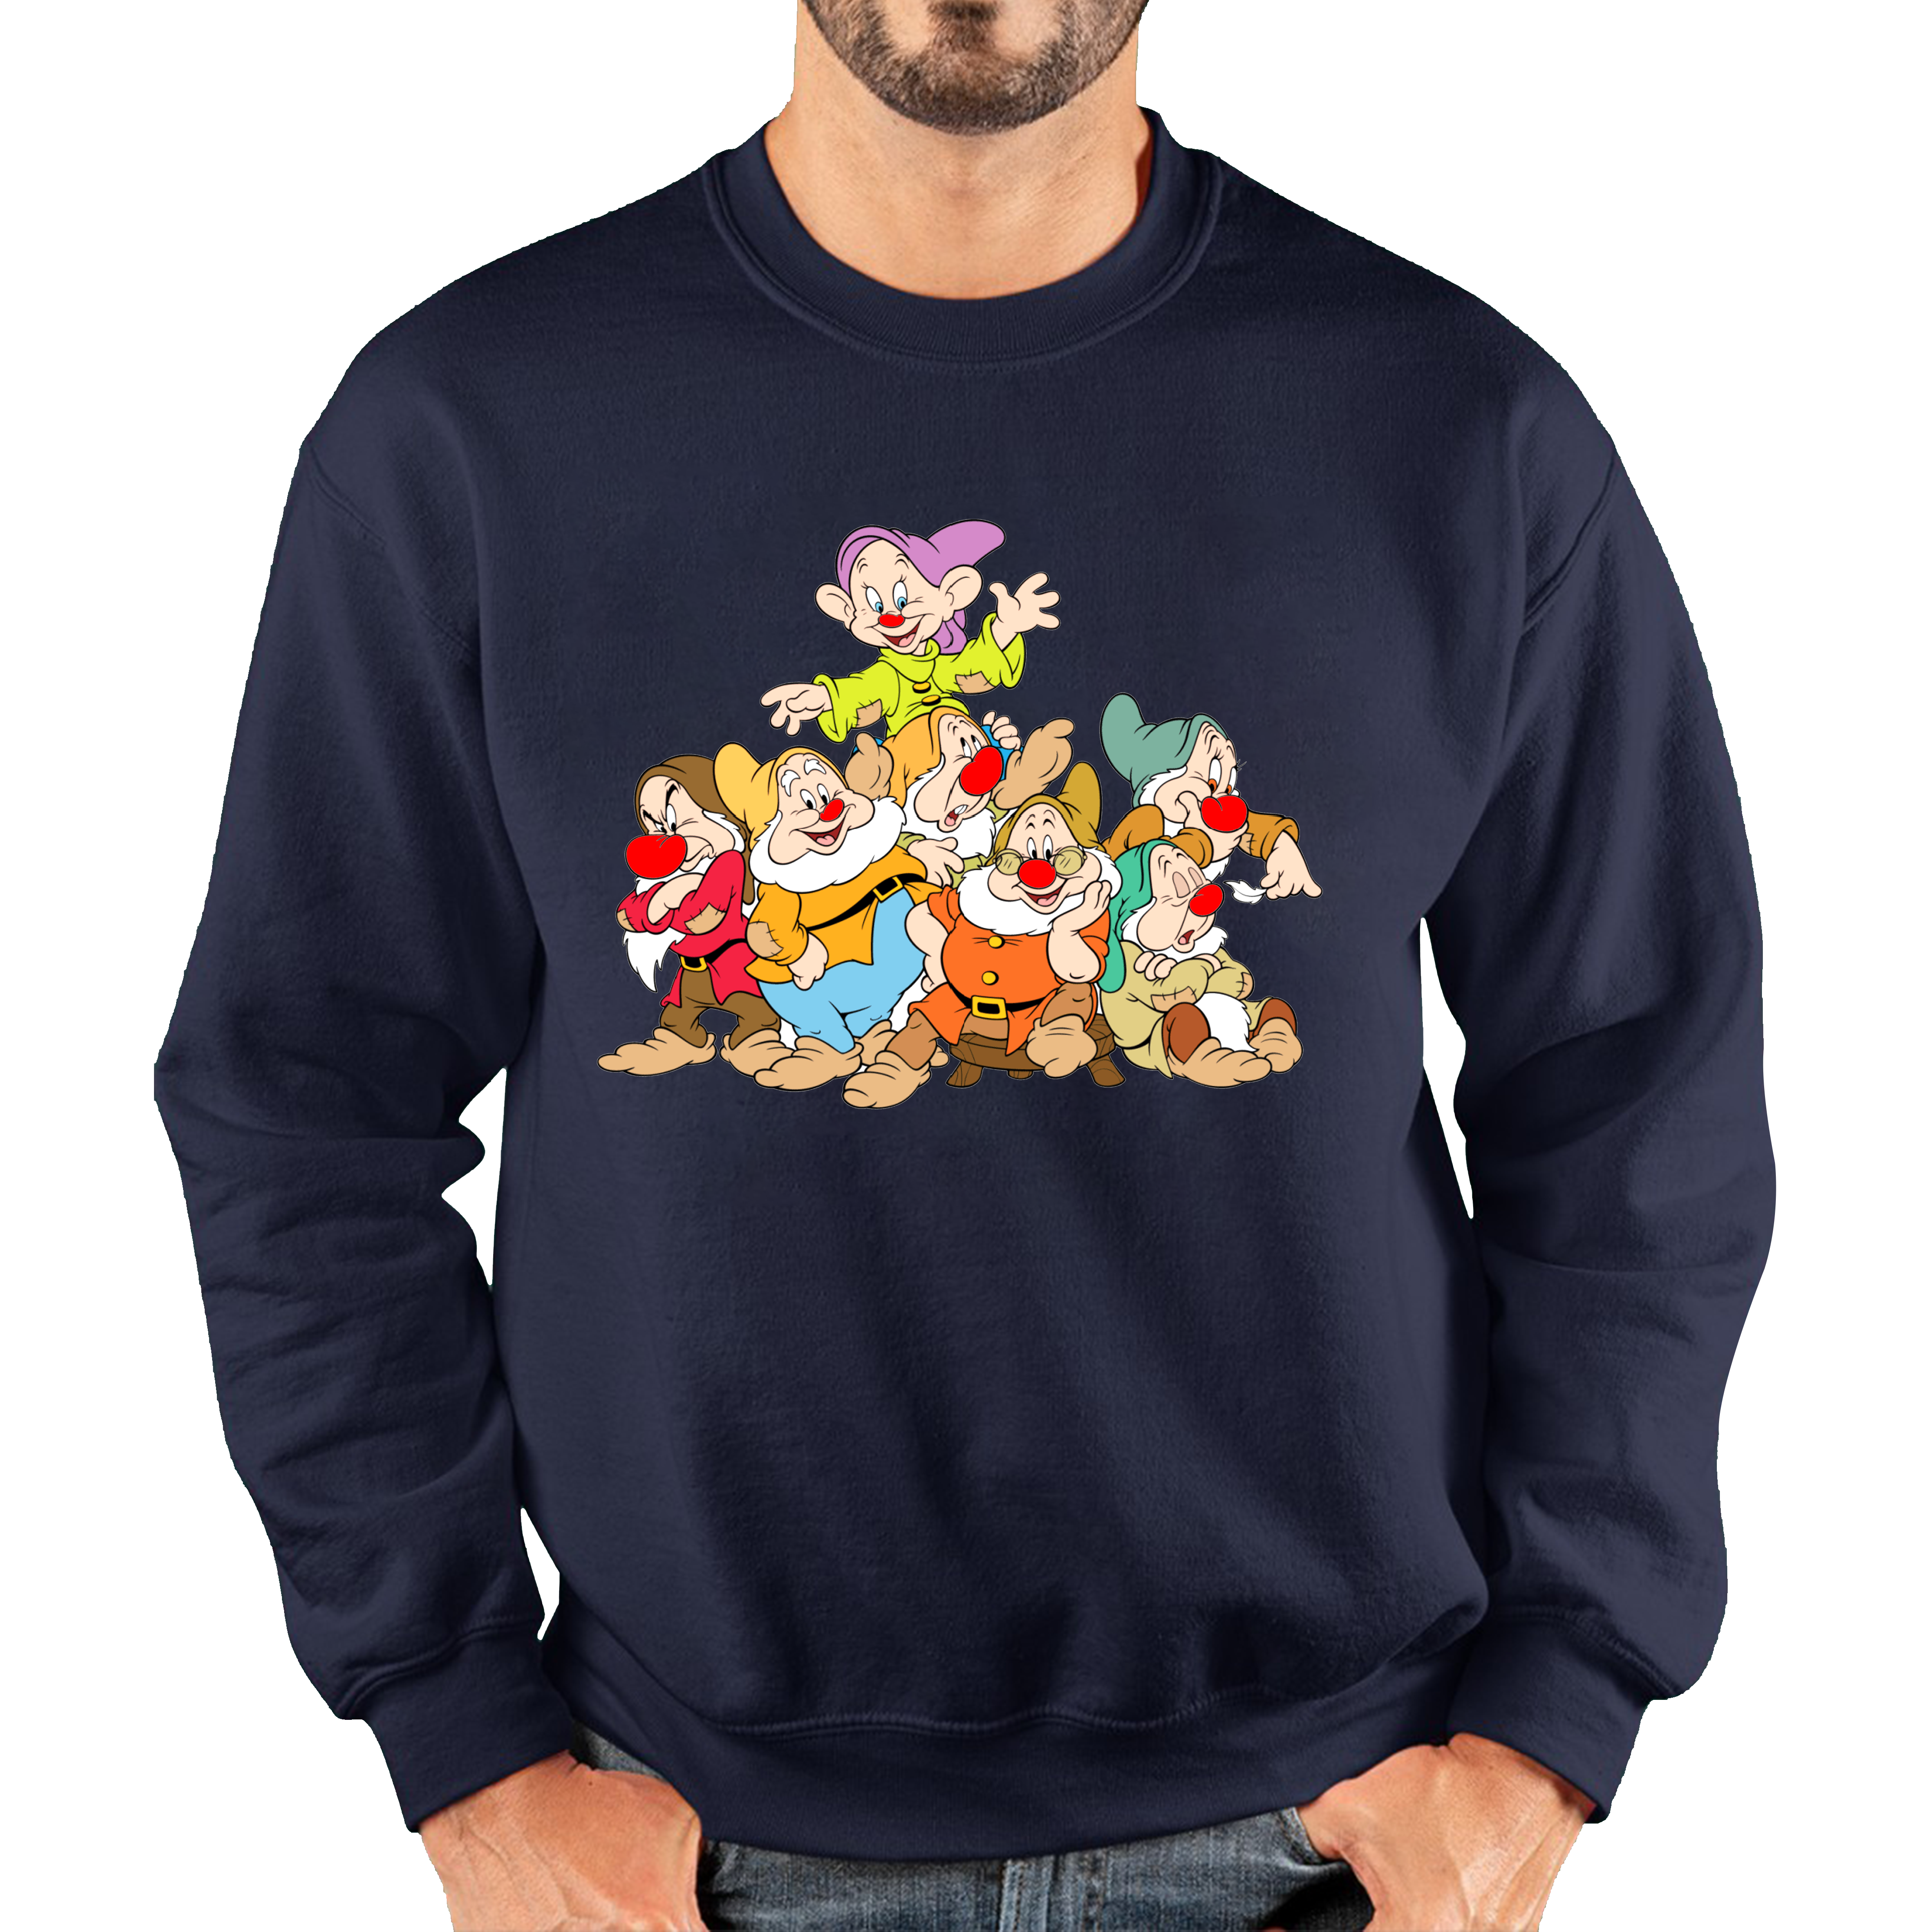 Disney Snow White and Seven Dwarfs Red Nose Day Adult Sweatshirt. 50% Goes To Charity